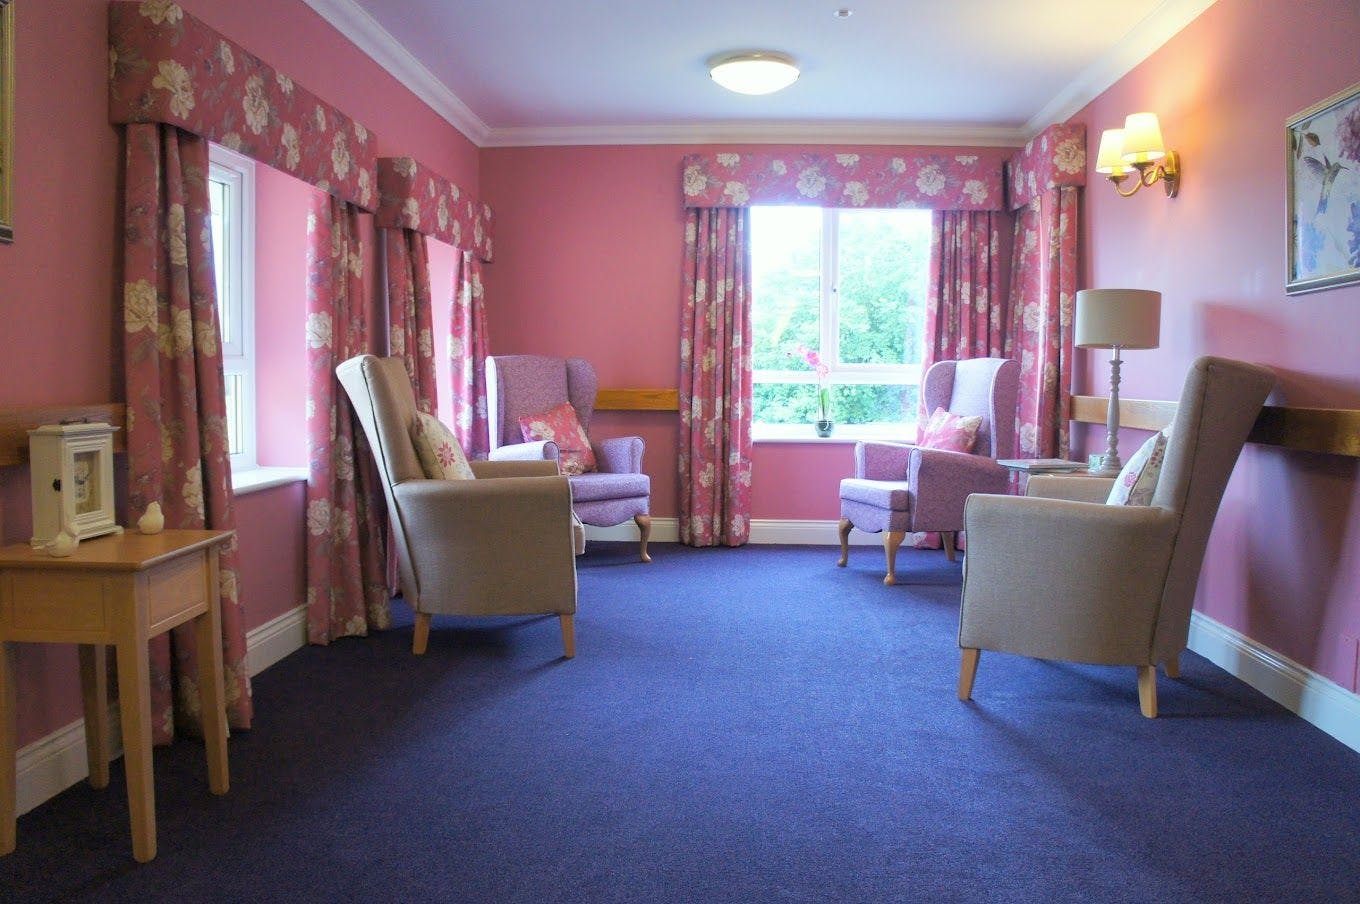 Communal Area at Sutton Grange Care Home in Southport, Merseyside